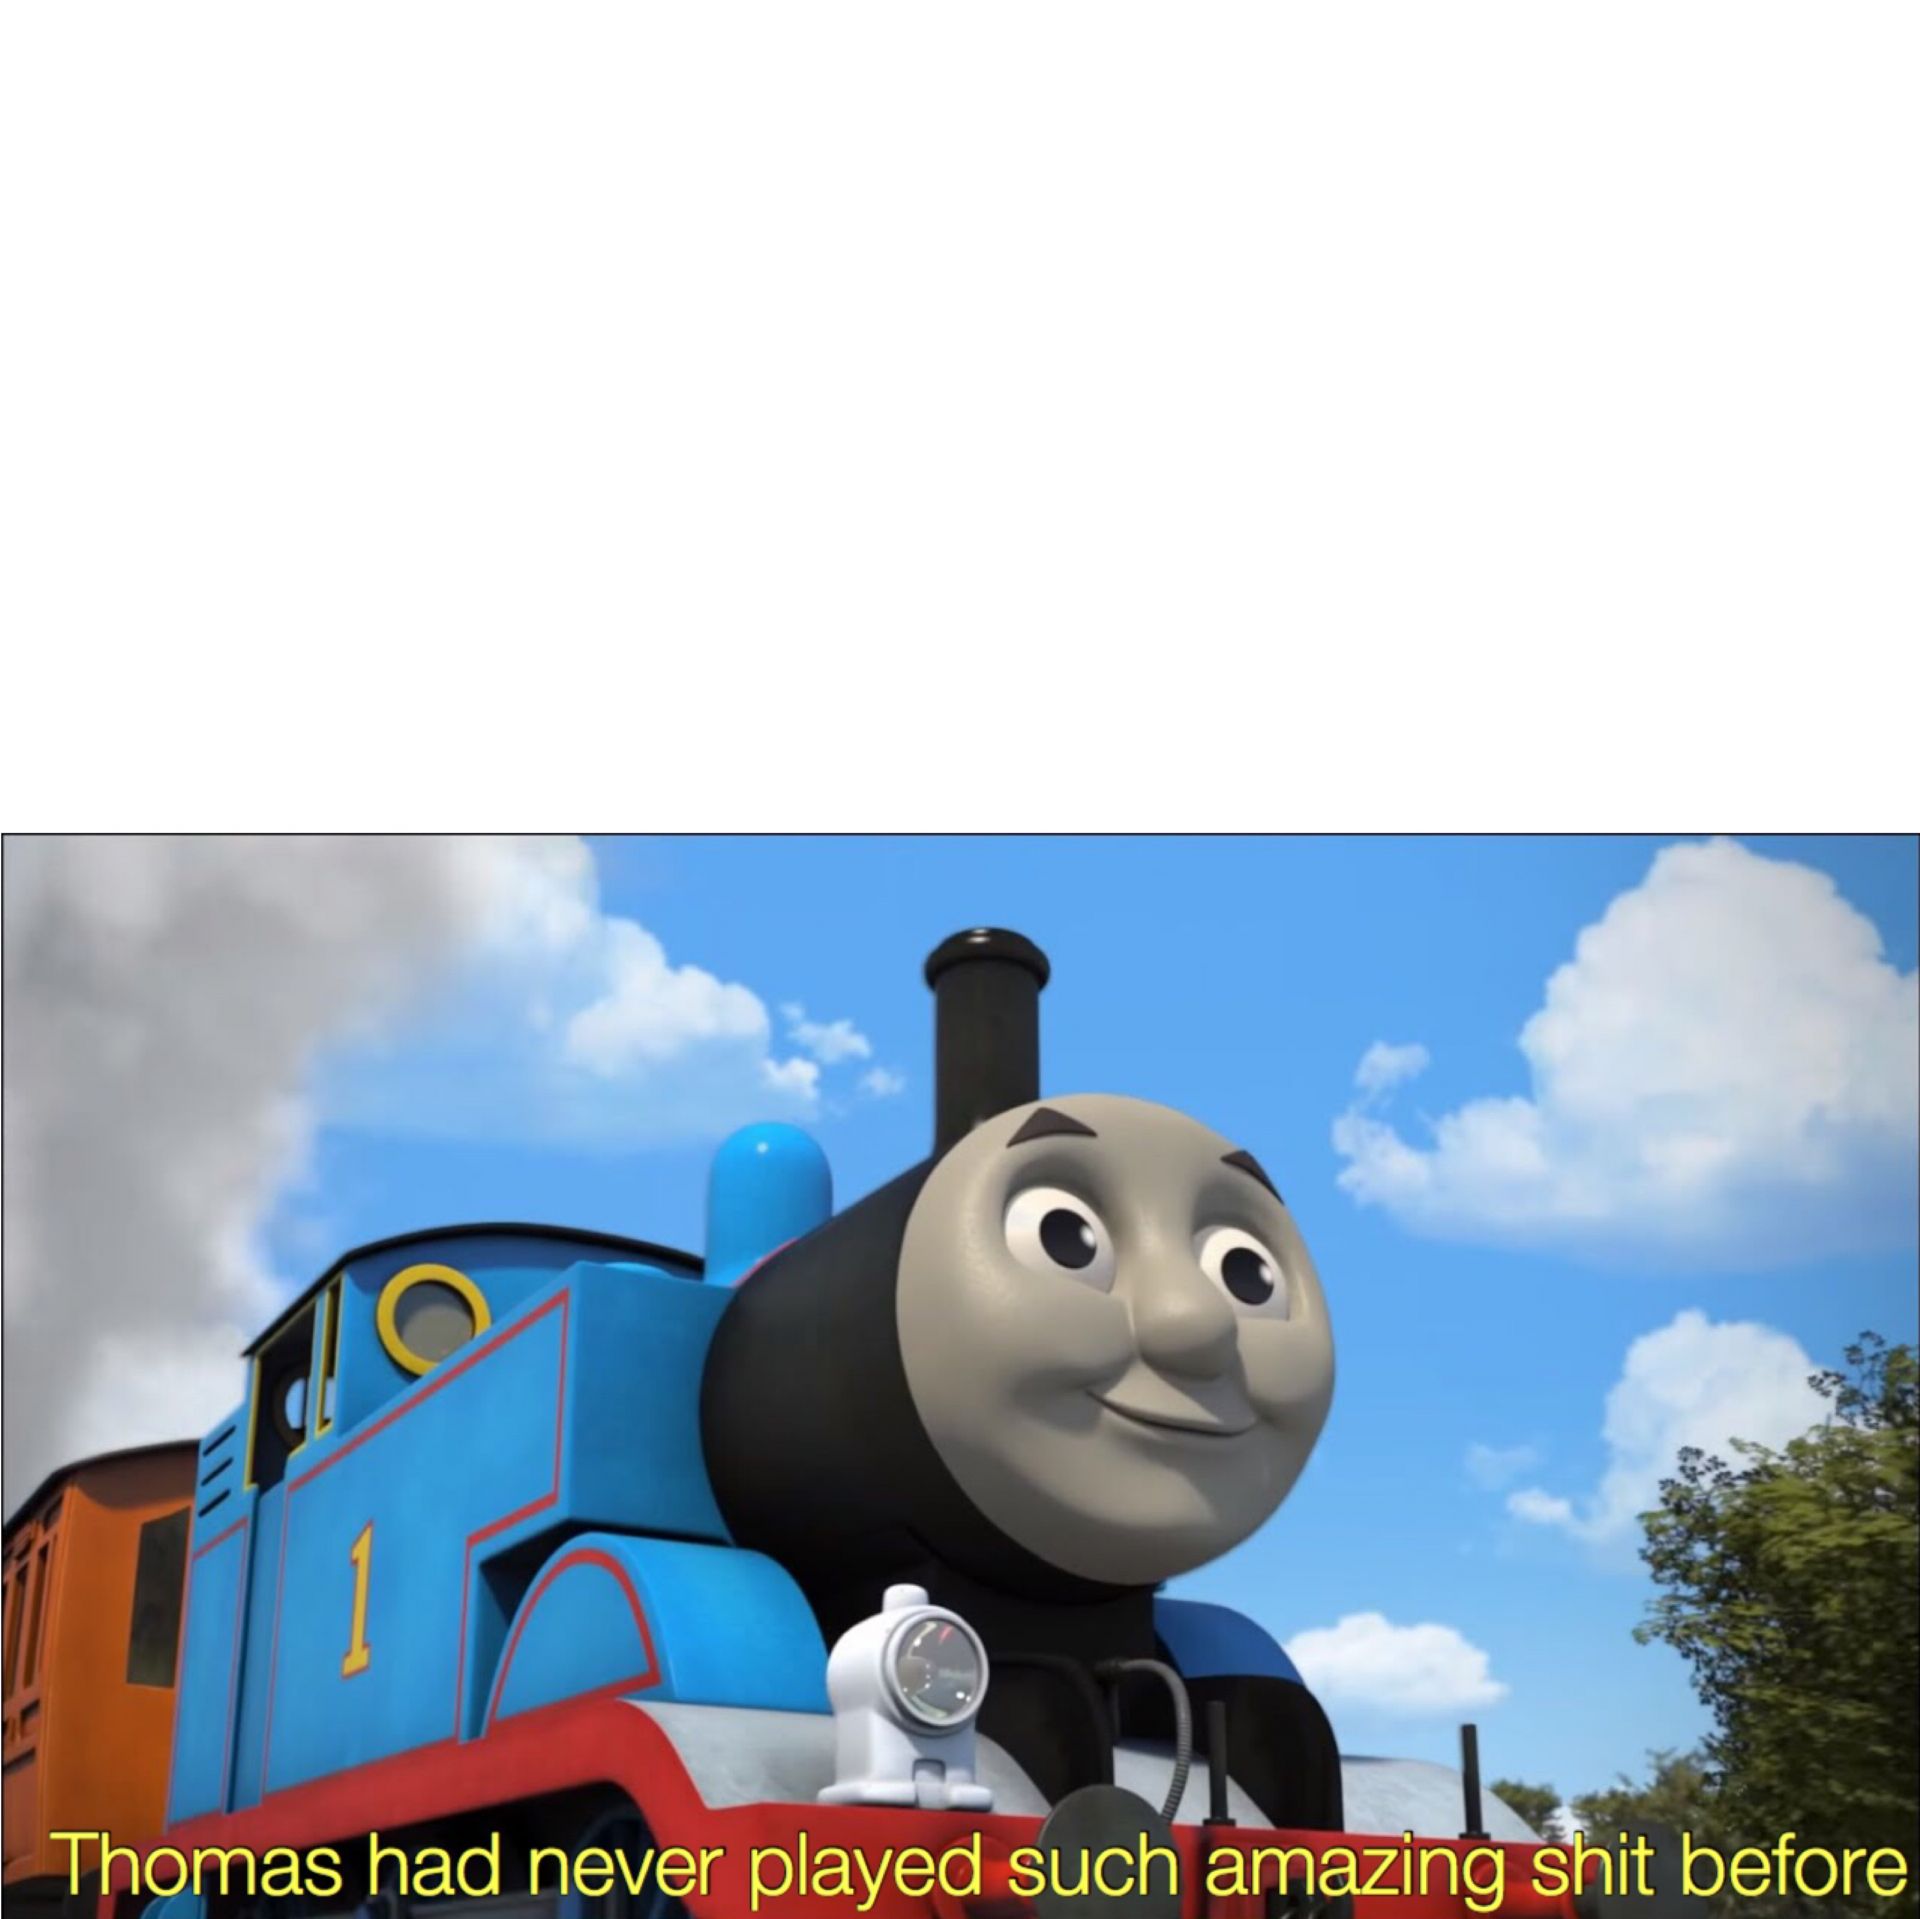 High Quality Thomas had never played such amazing shit before Blank Meme Template